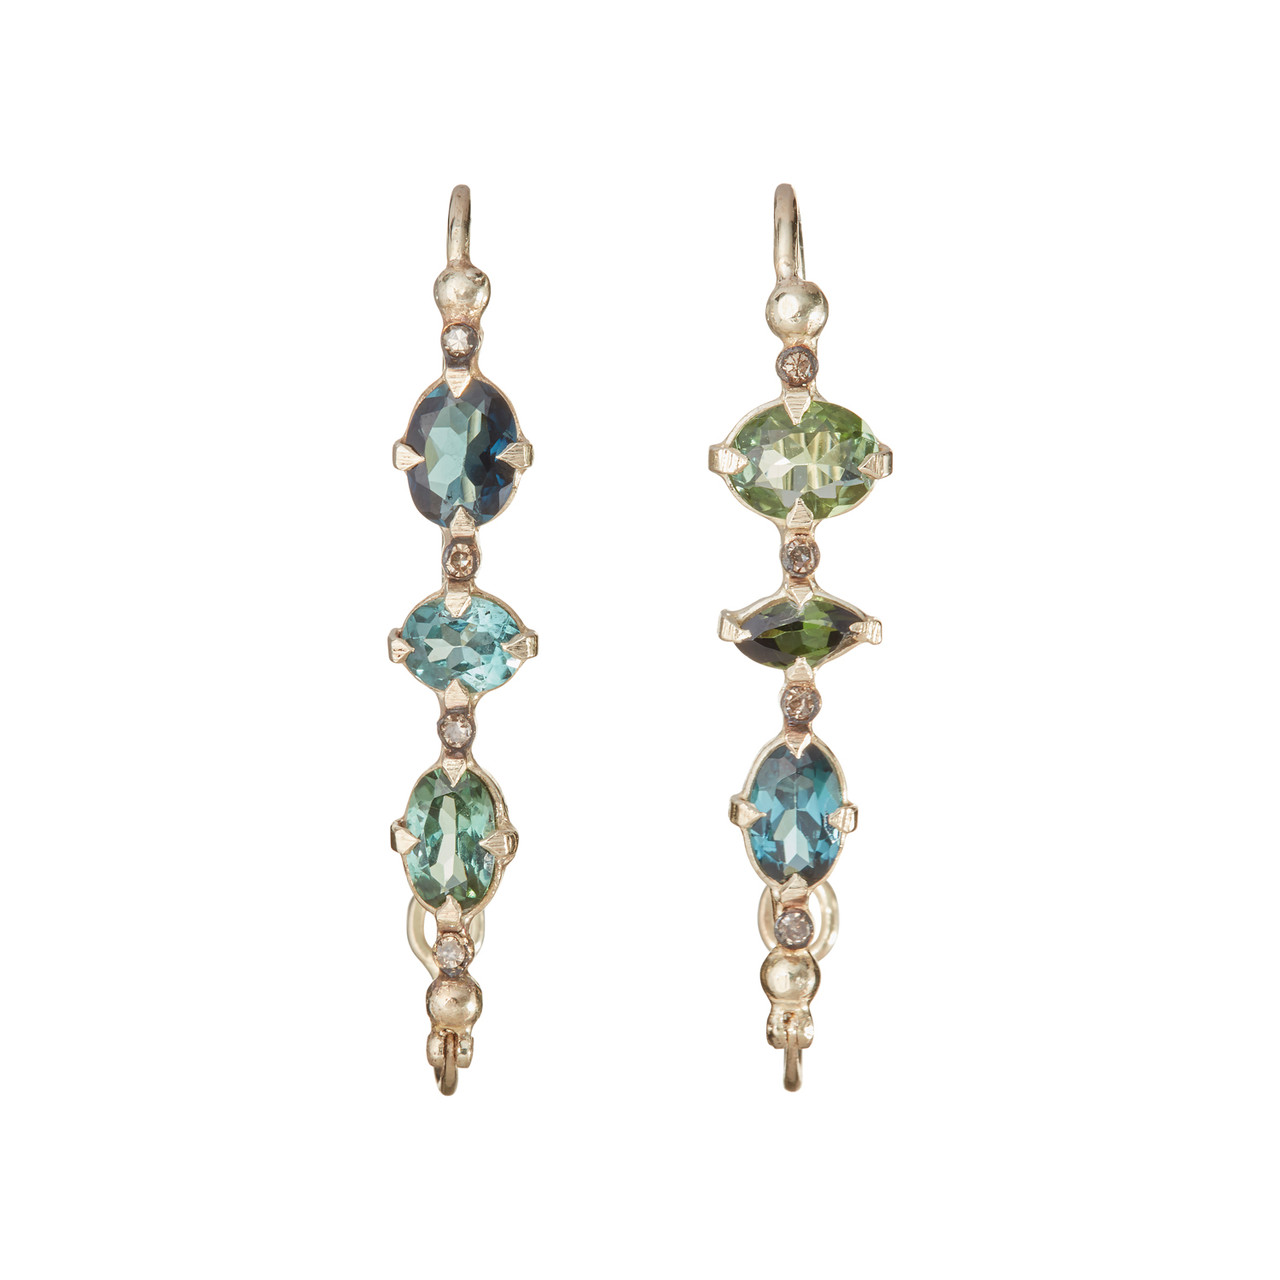 Paola 14ct Yellow Gold & Tourmaline Drop Earrings, 5 Octobre, tomfoolery